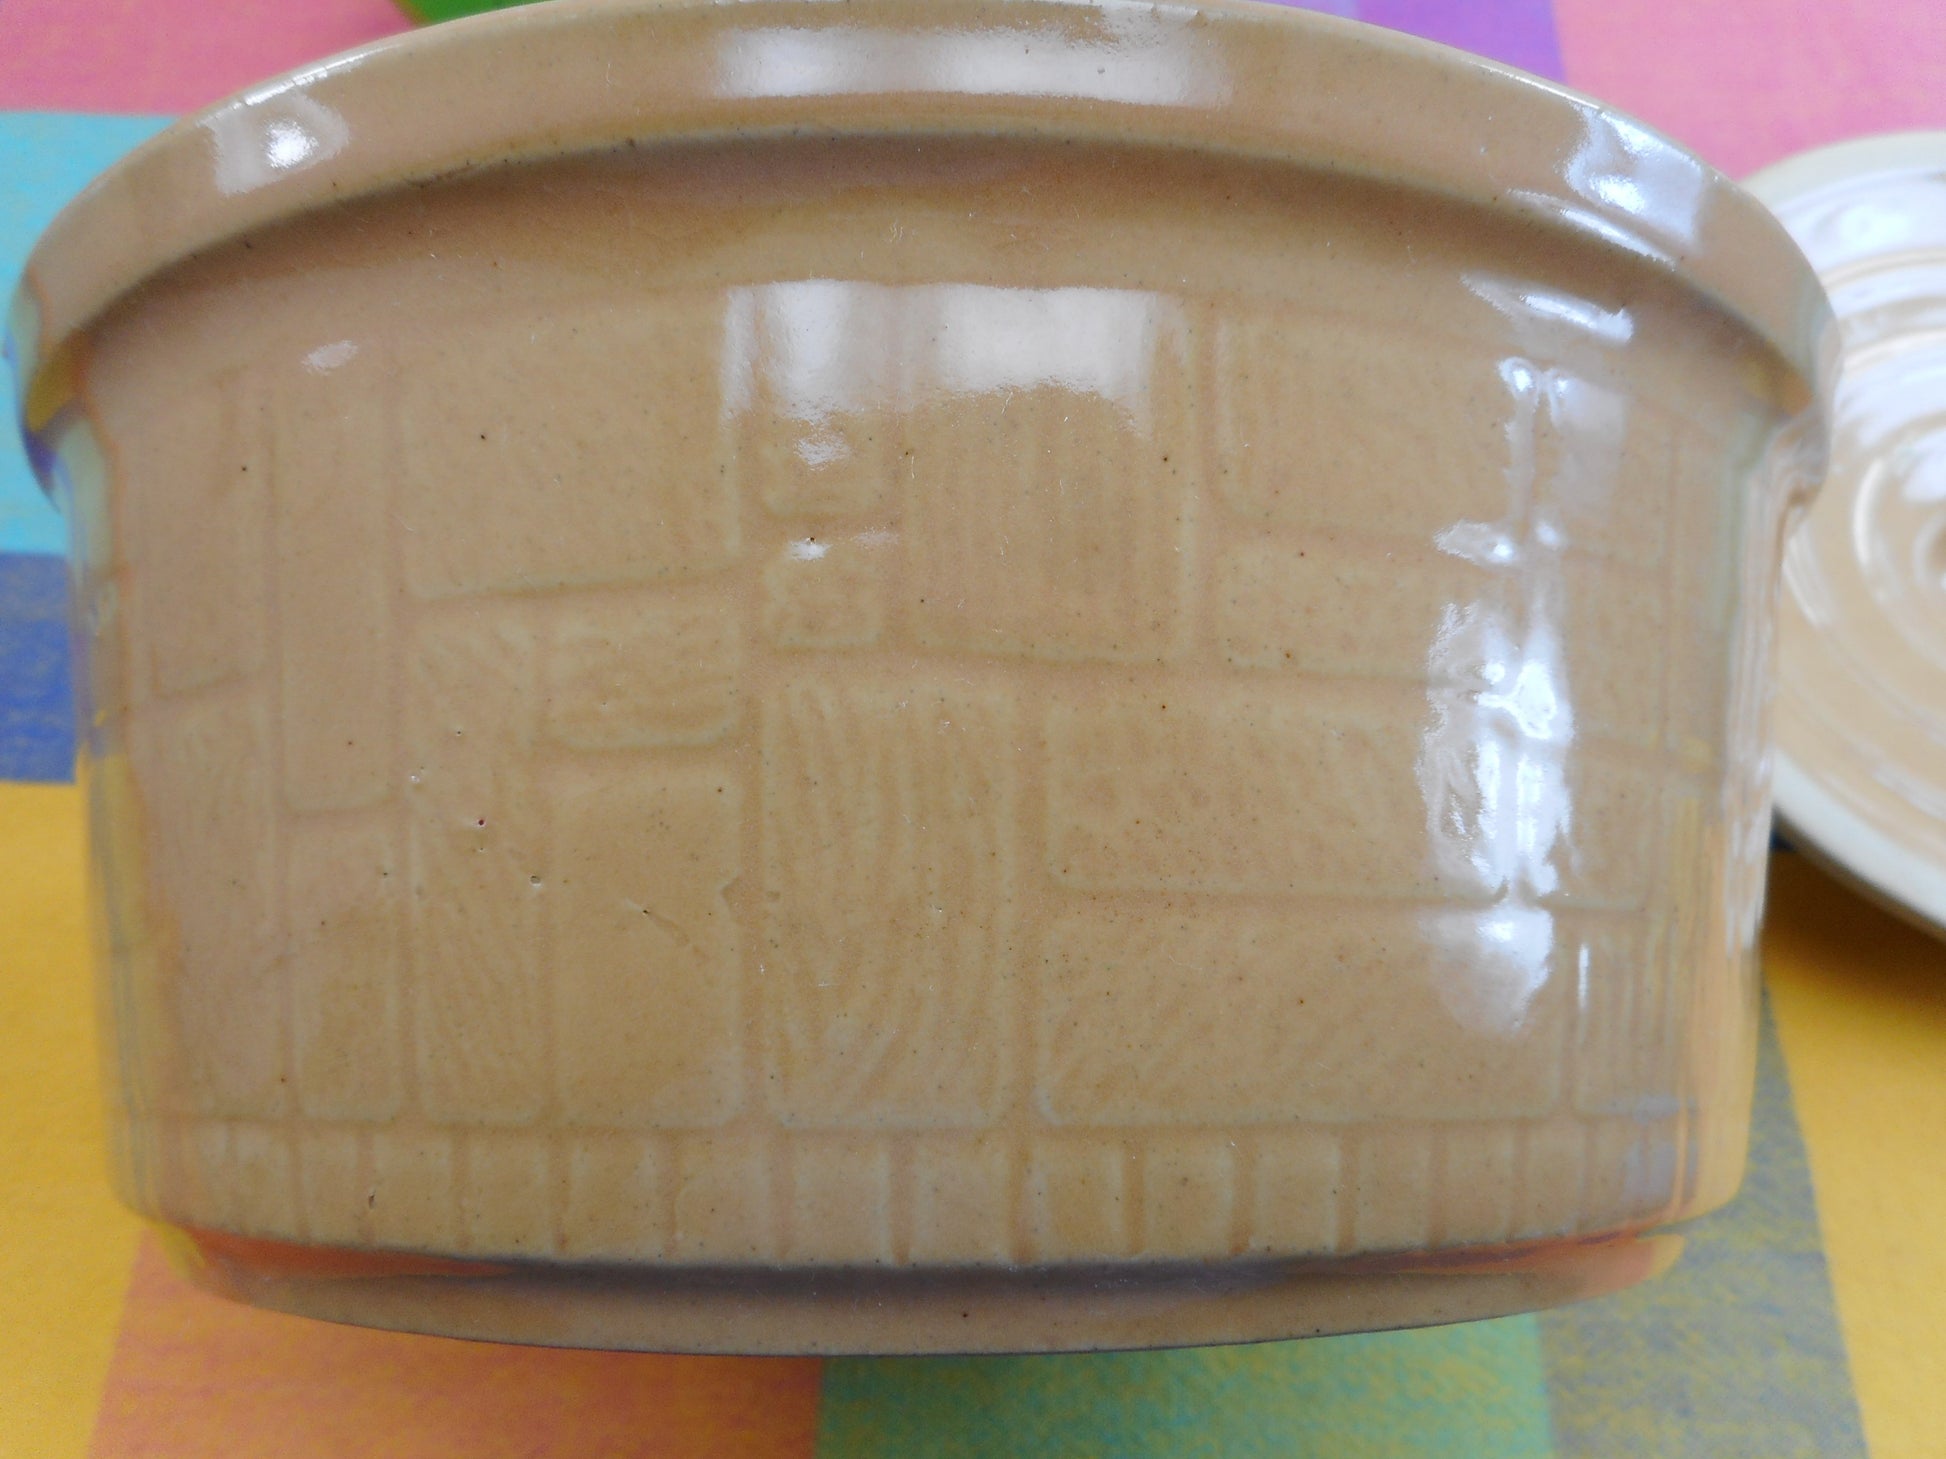 USA Round 8" Yellow Ware Soneware Covered Casserole - Rectangle Weave Wood Parquet Pattern